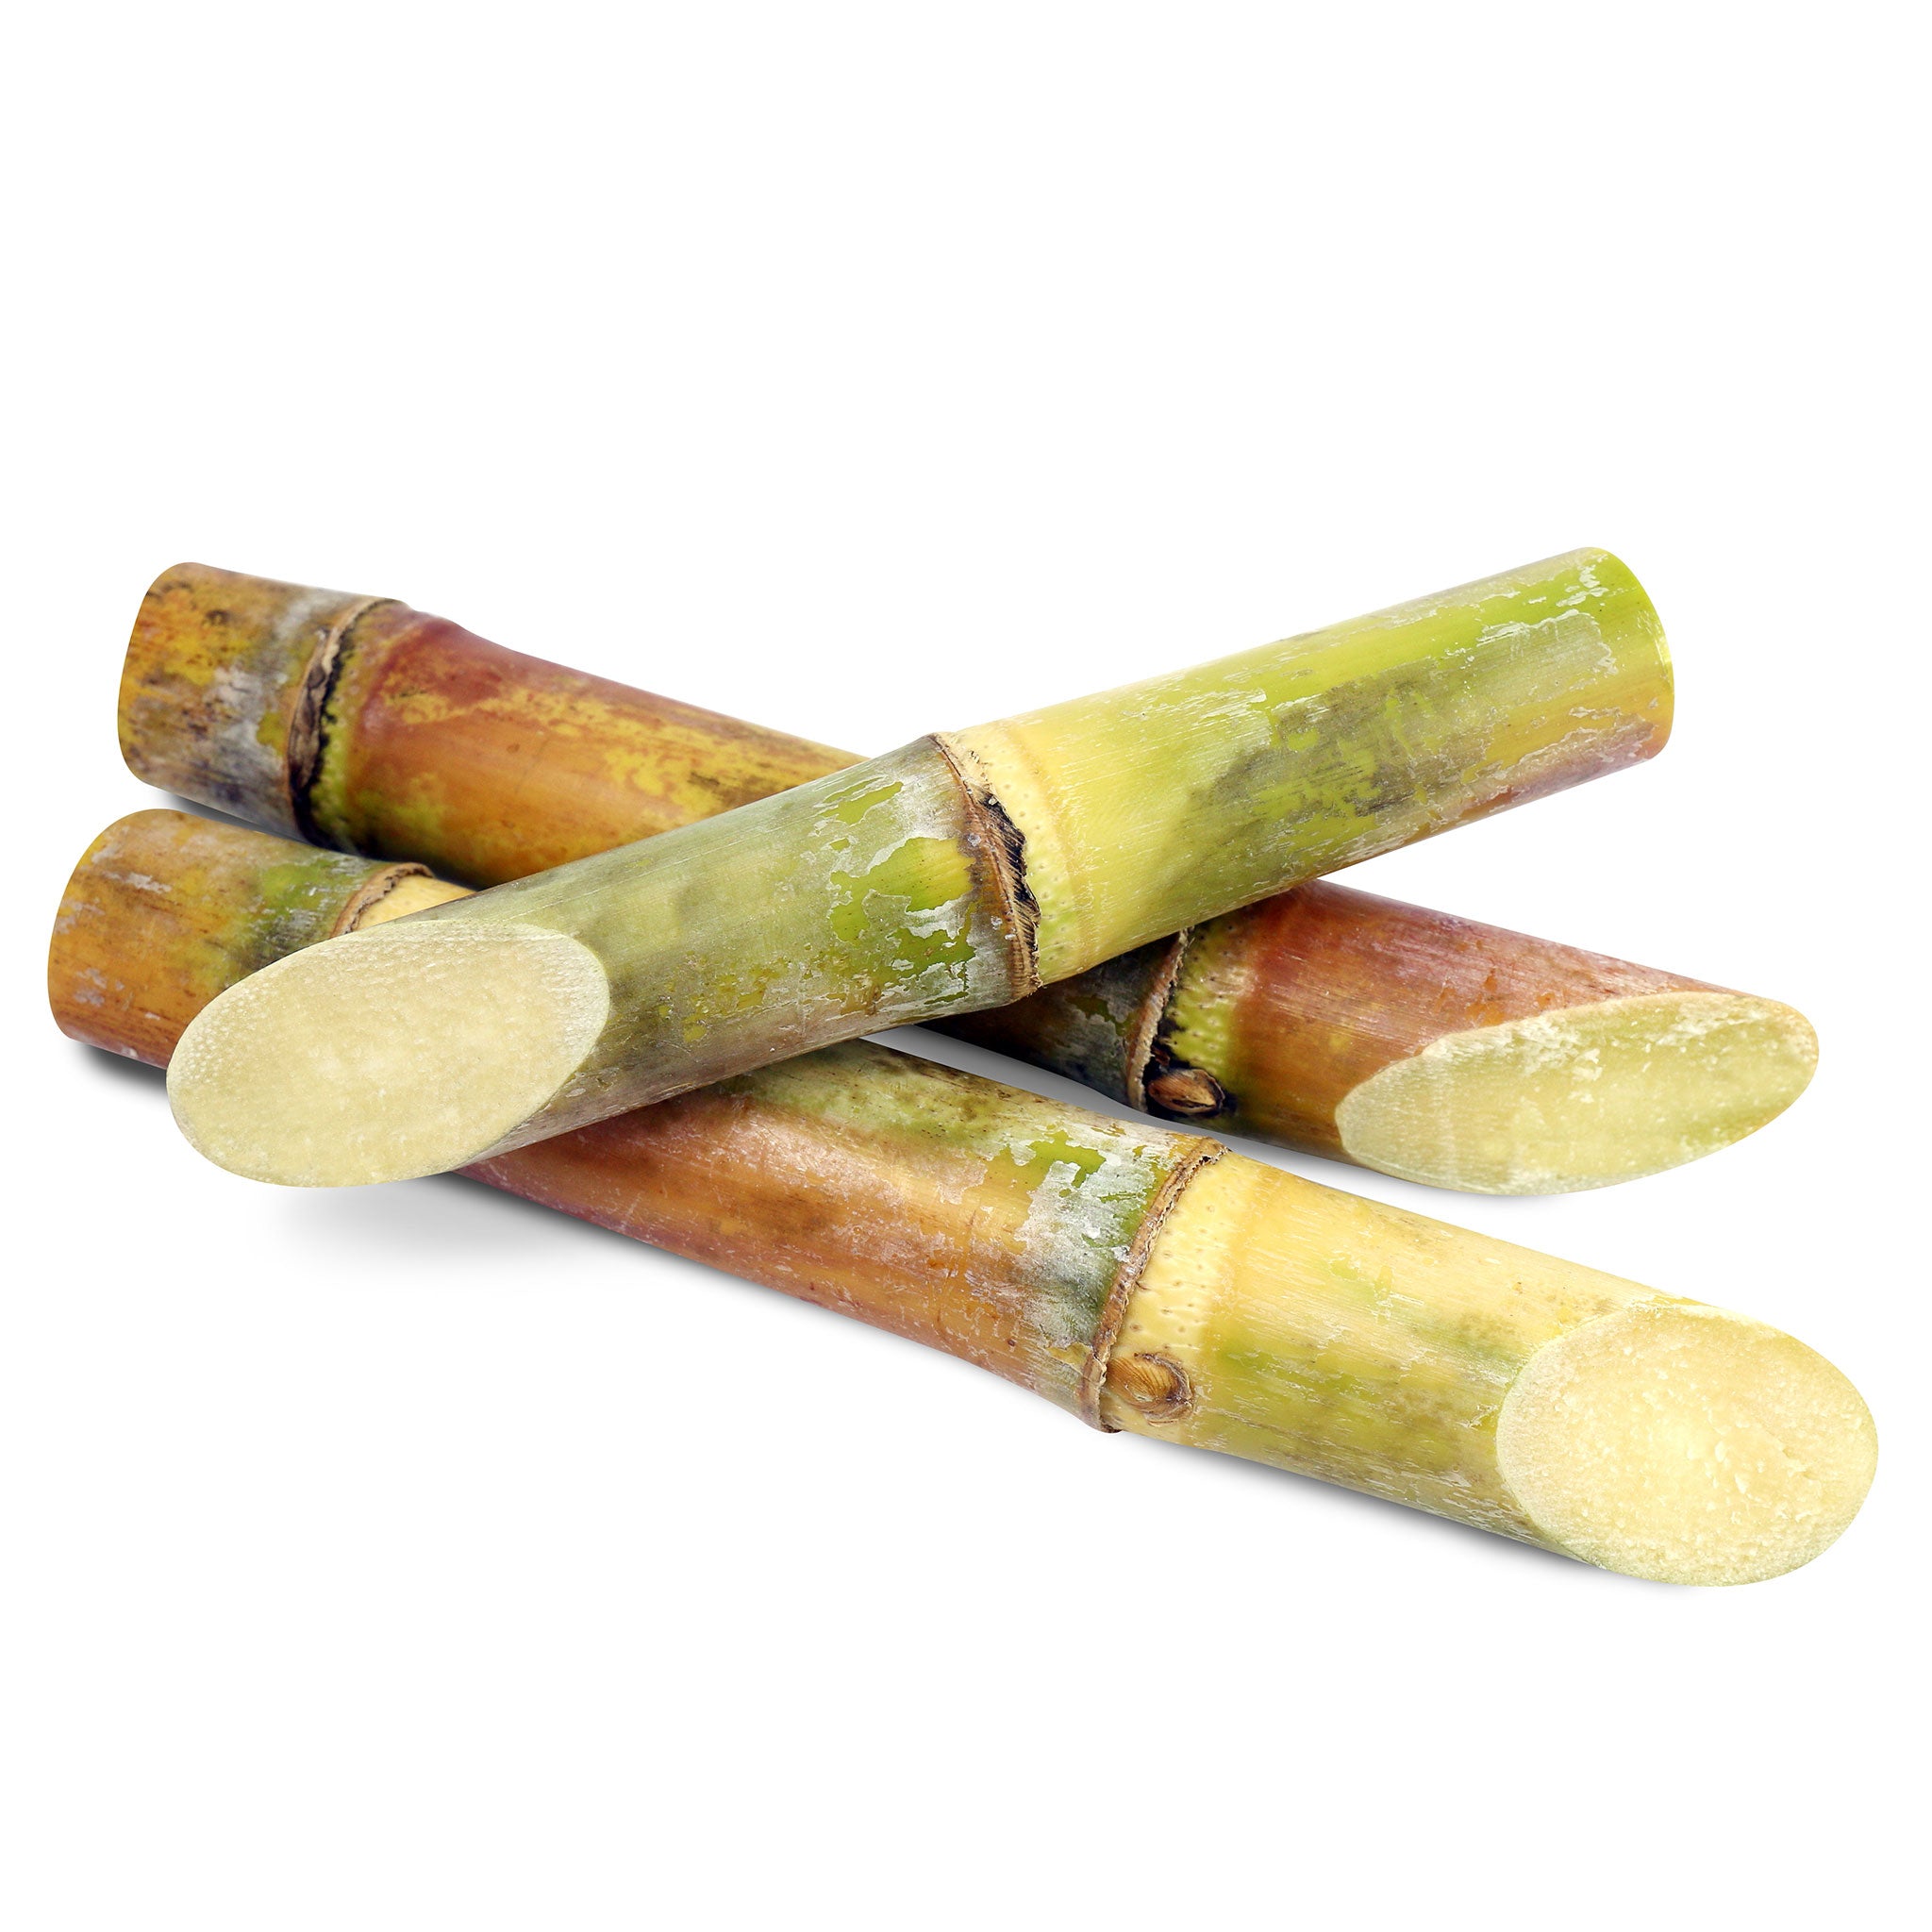 Fresh Thai Sugar Cane (sugarcane) about 500g - Imported Weekly from Thailand